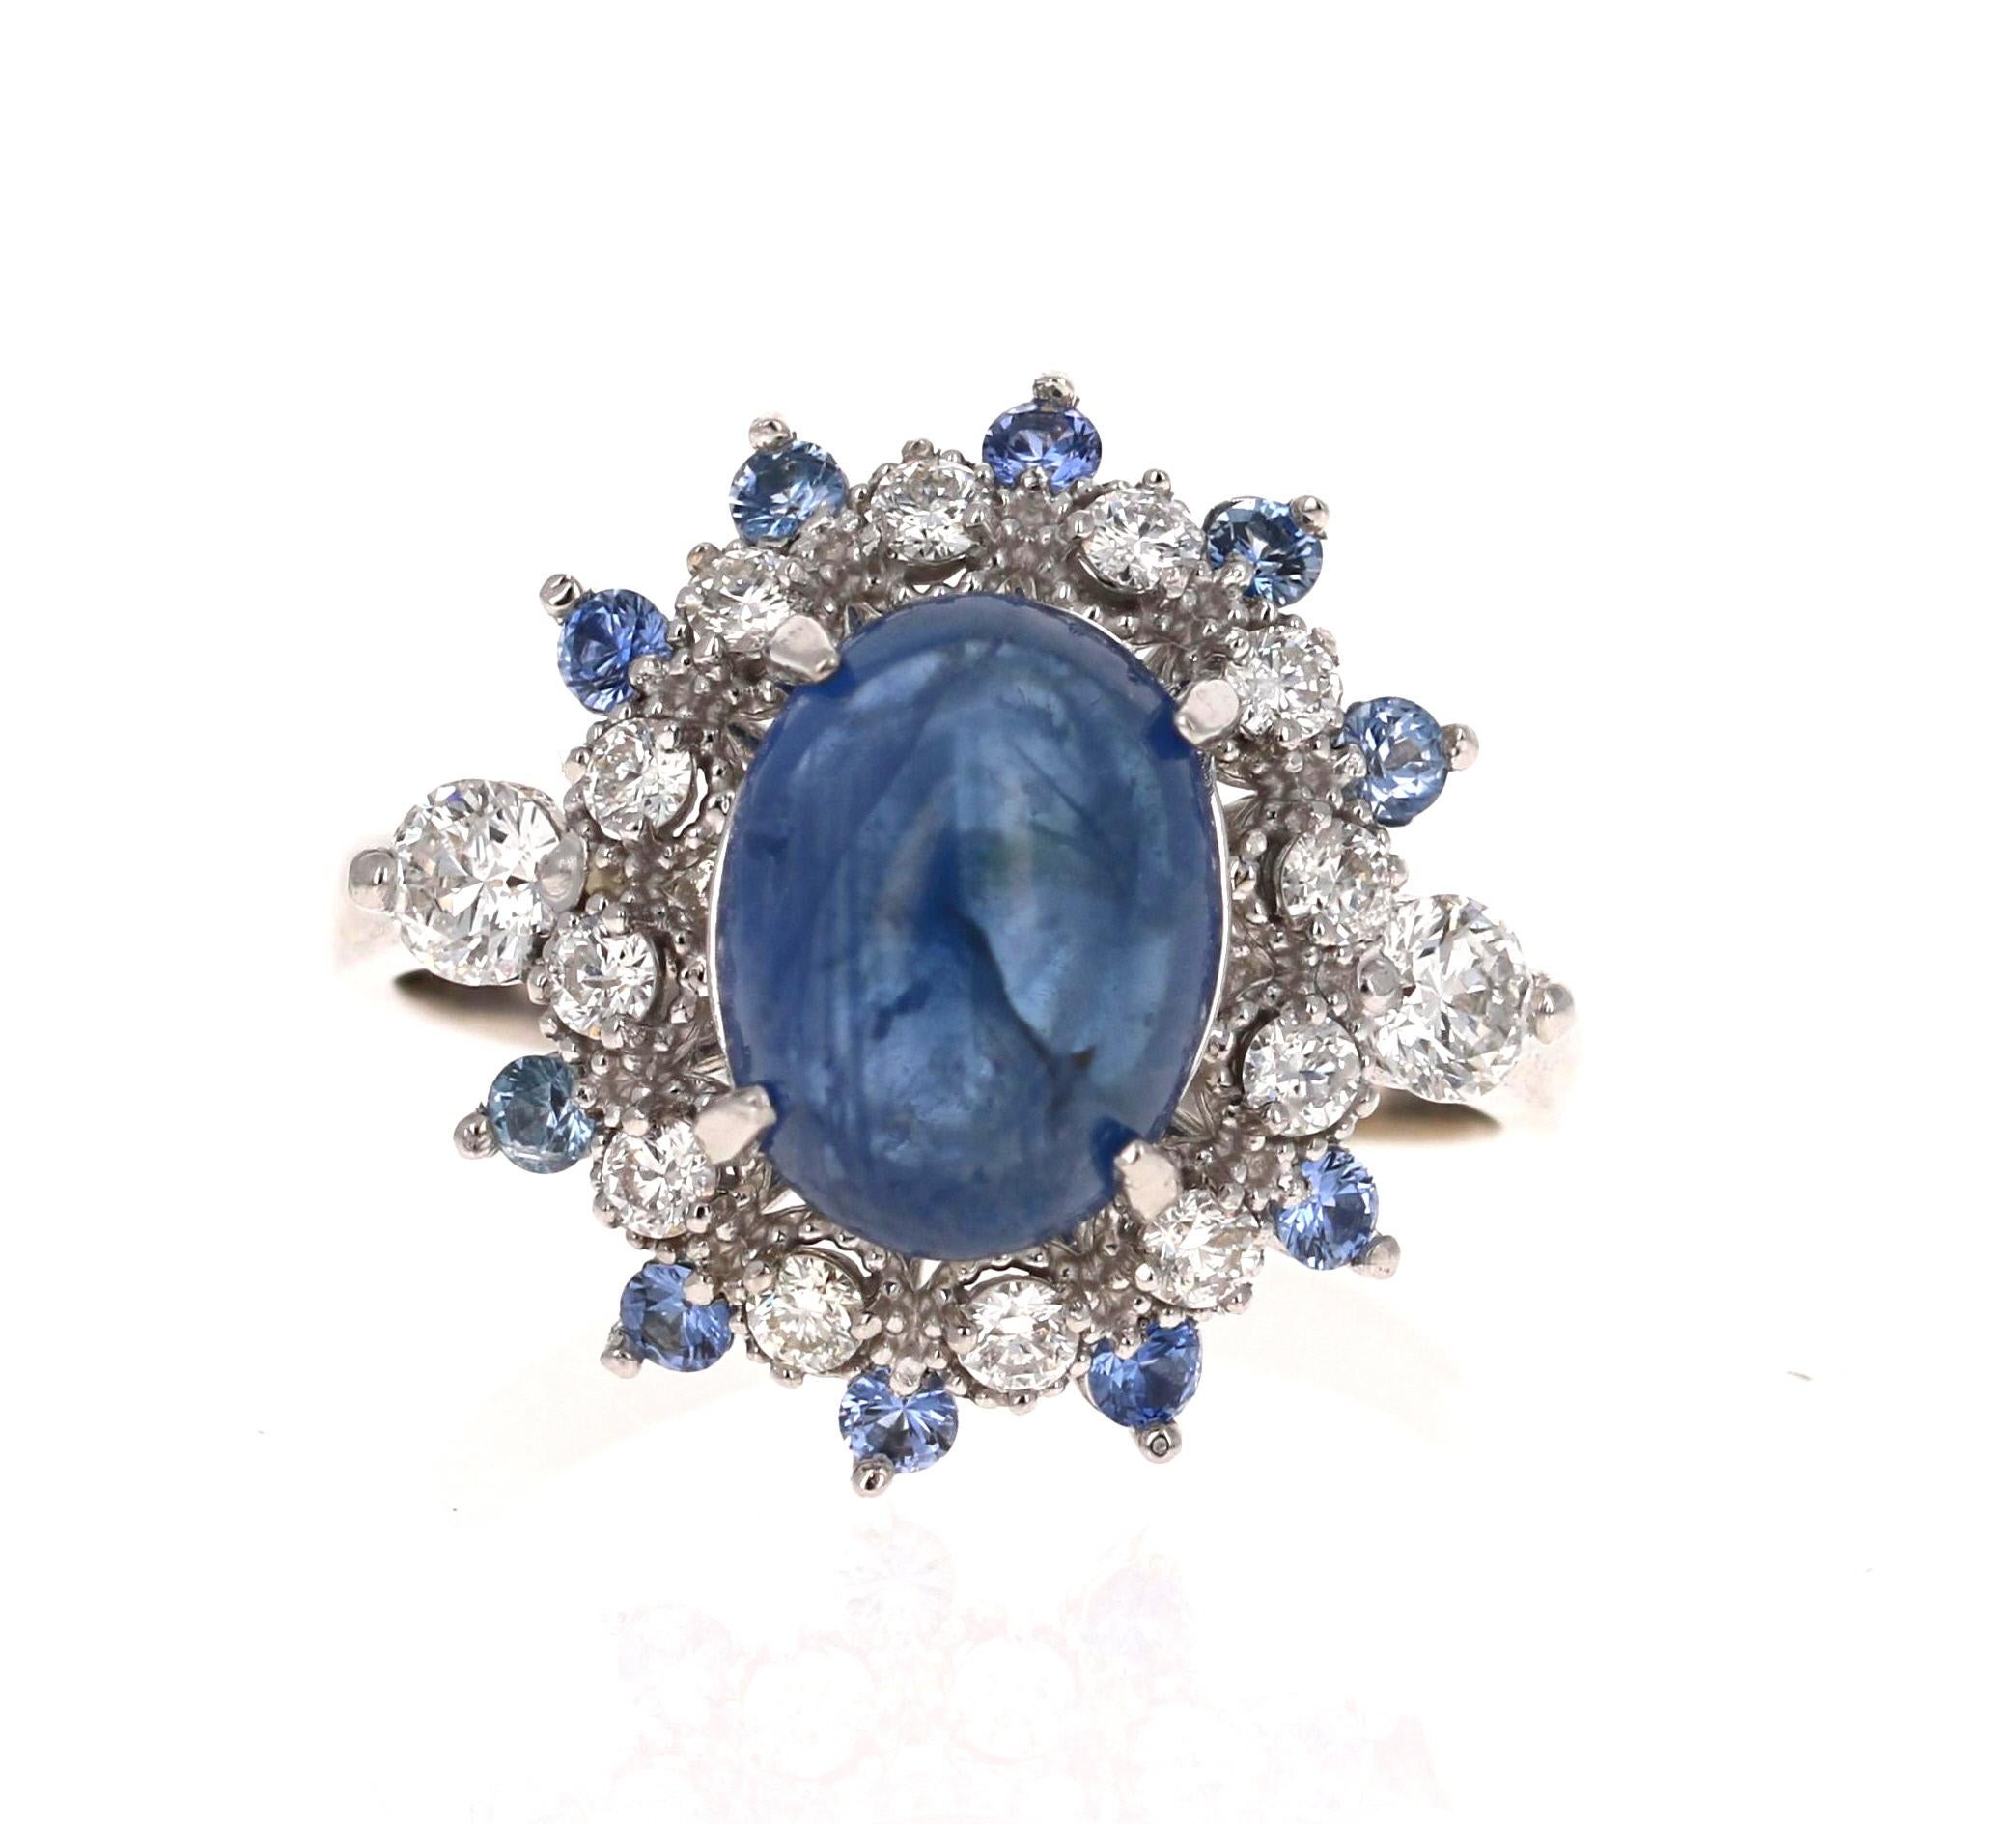  This ring has a Cabochon Blue Sapphire that weighs 4.10 carats set in the center of the ring. The Sapphire is surrounded by 14 Round Cut Diamonds that weigh 0.56 carats (Clarity: SI2, Color: F) and also has 12 Round Cut Blue Sapphires that weigh